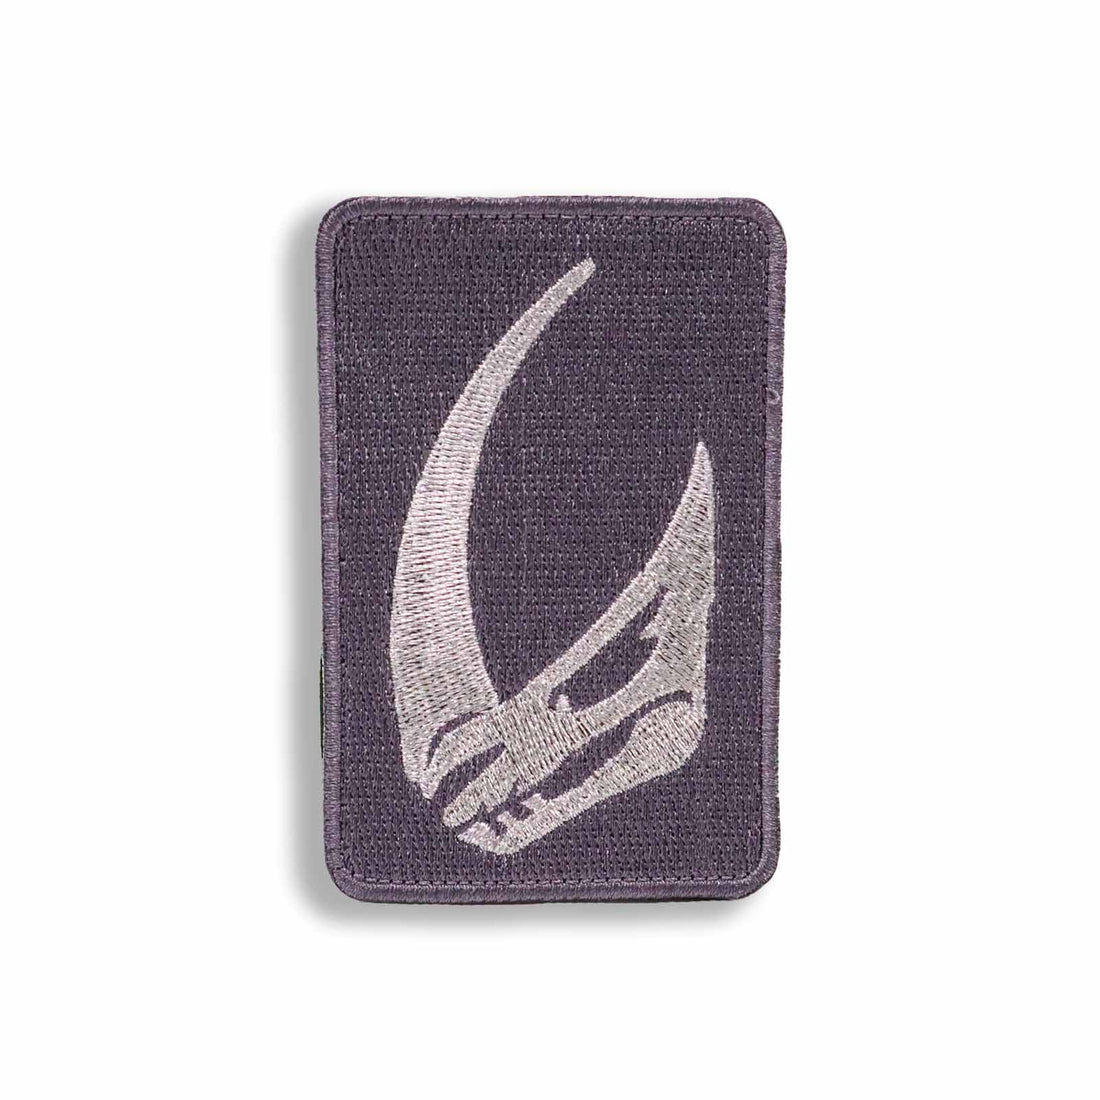 Supplies - Identification - Morale Patches - Tactical Outfitters Mudhorn Mandalorian Embroidered Morale Patch